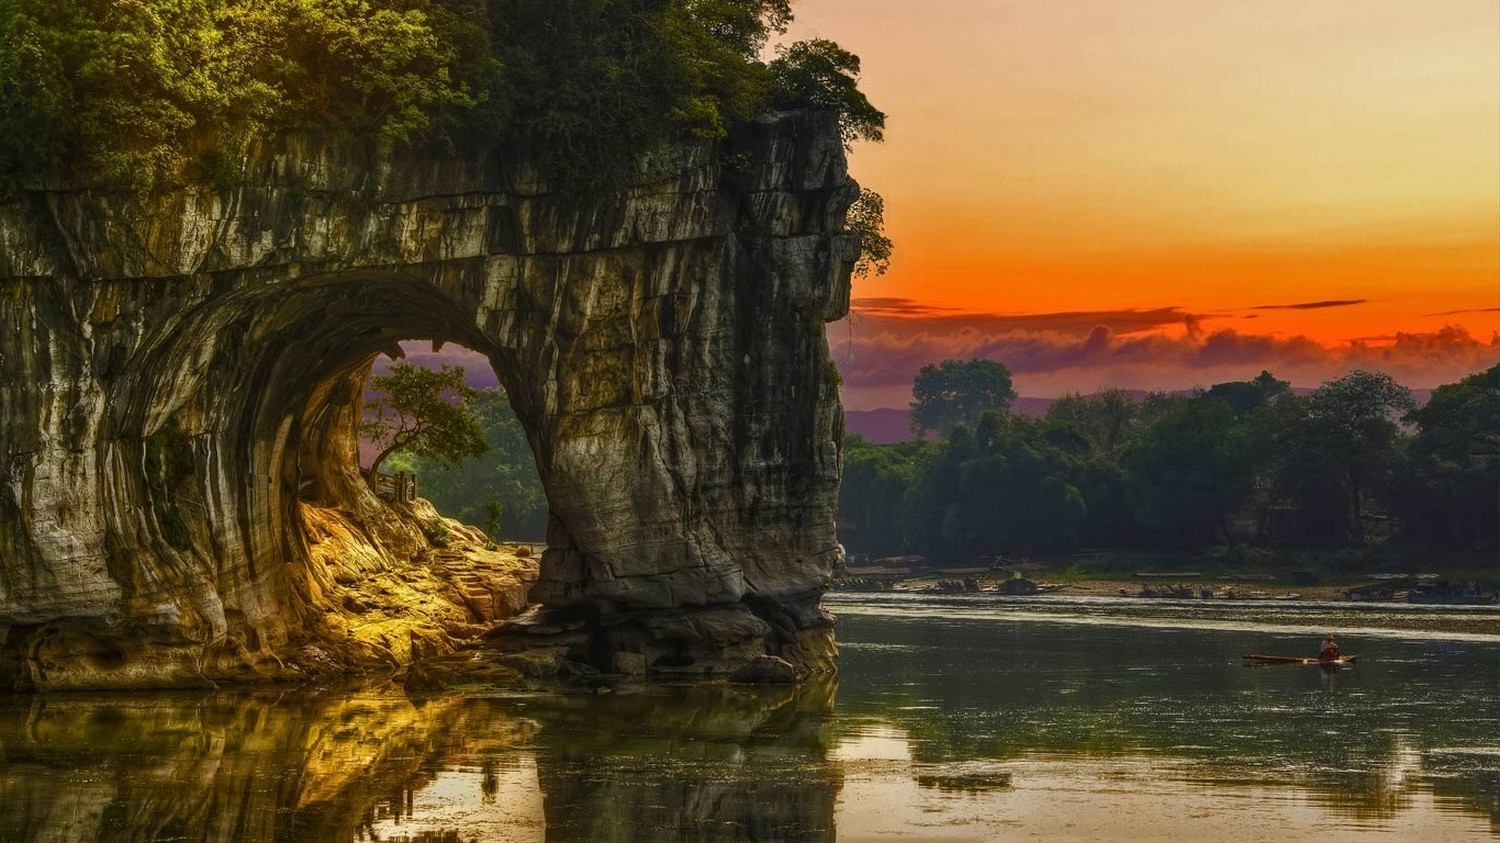 nature, Landscape, Lake, Boat, Arch, Trees, Sunset, Shrubs, Rock, Sky, Guilin, China, Water, Reflection Wallpaper